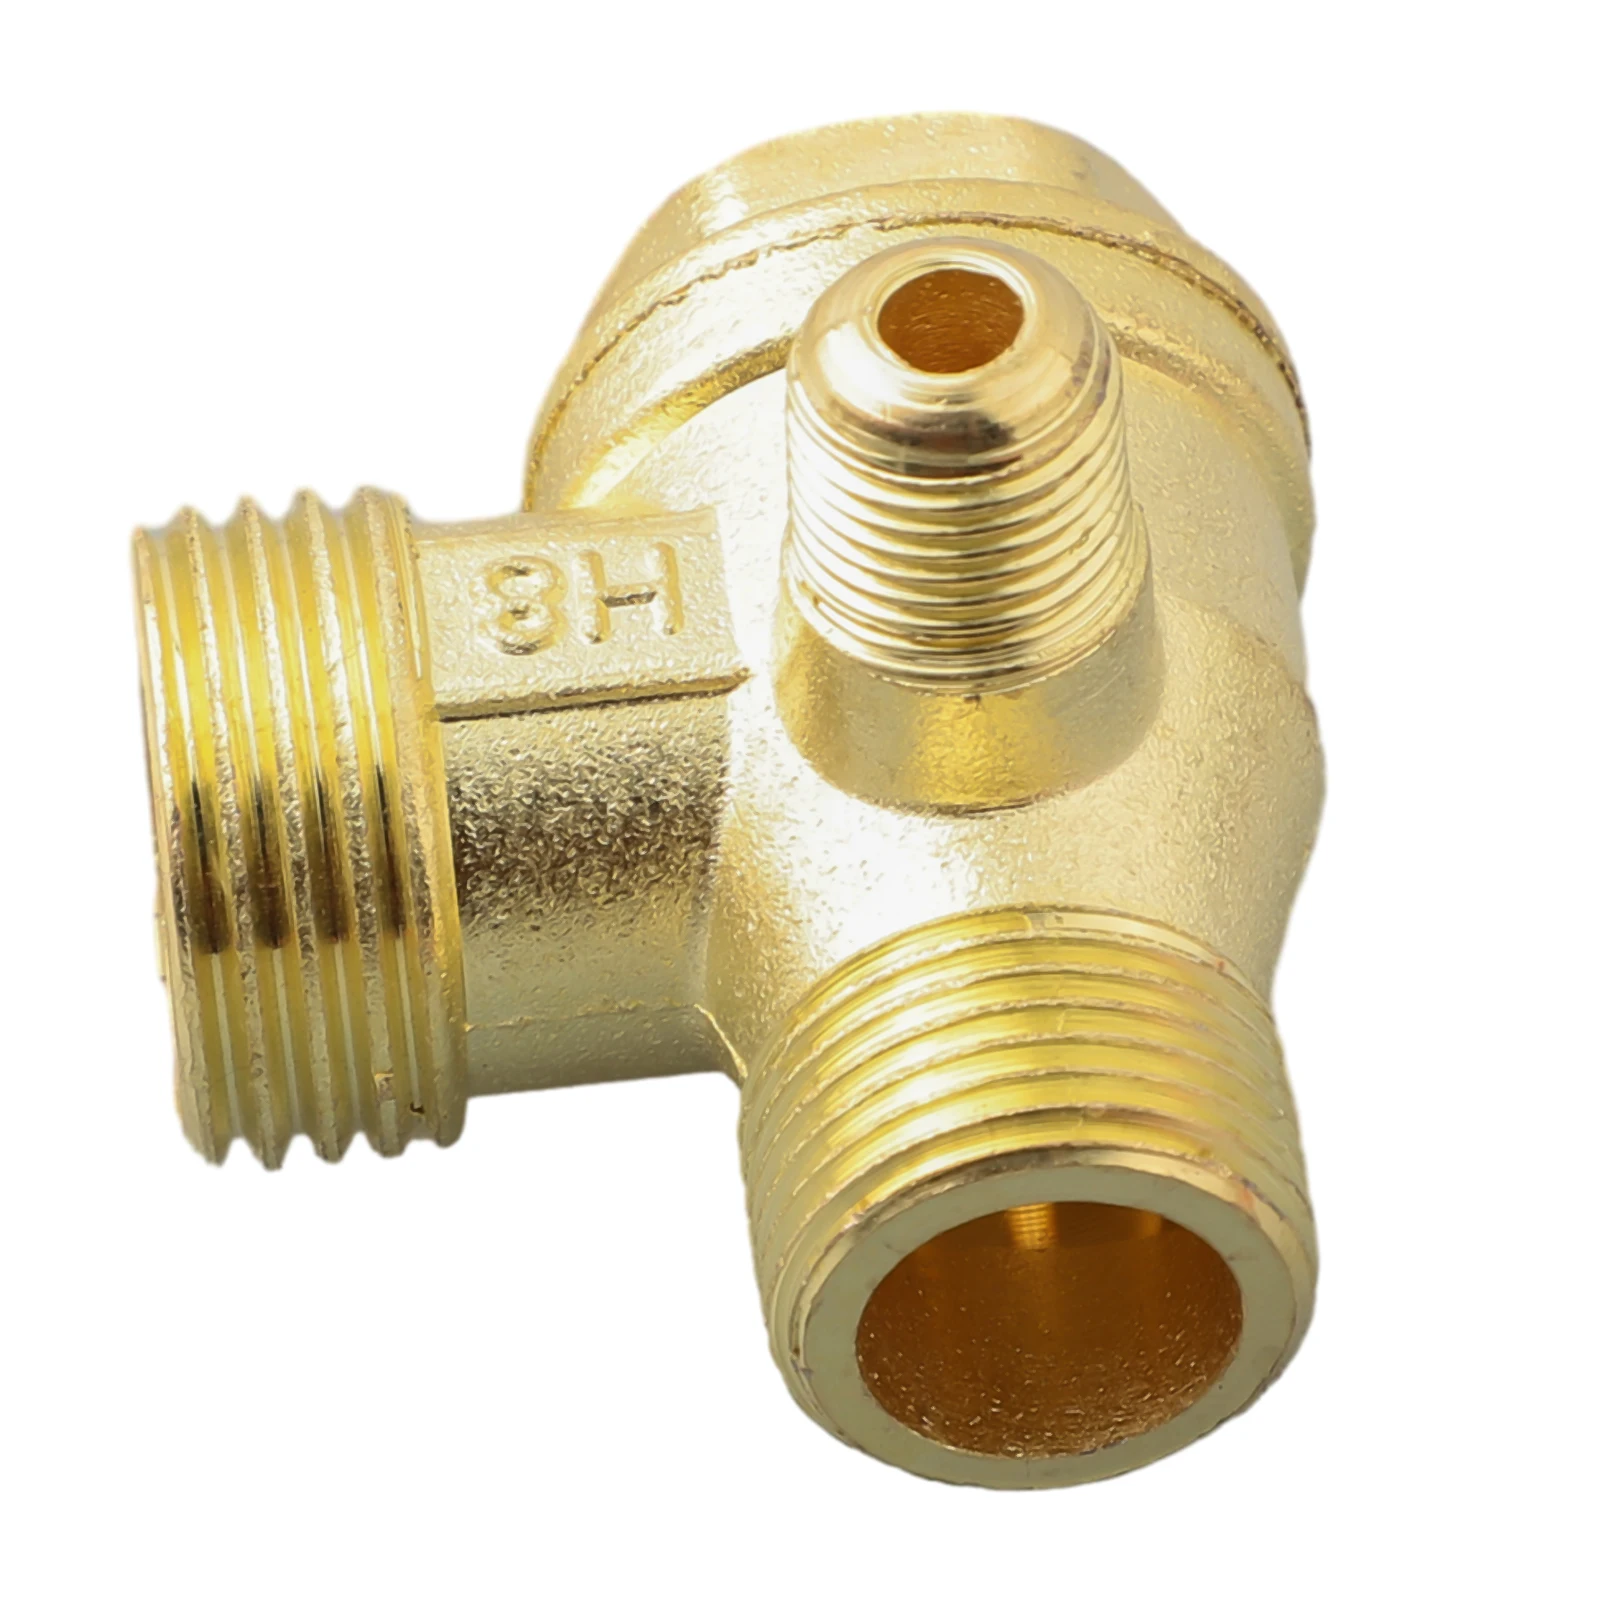 

Air Compressor Check Valve Tube Set 400mm Exhaust Tube 3-Port Valve Zinc Alloy Replacement Parts For Air Power Tools Accessories